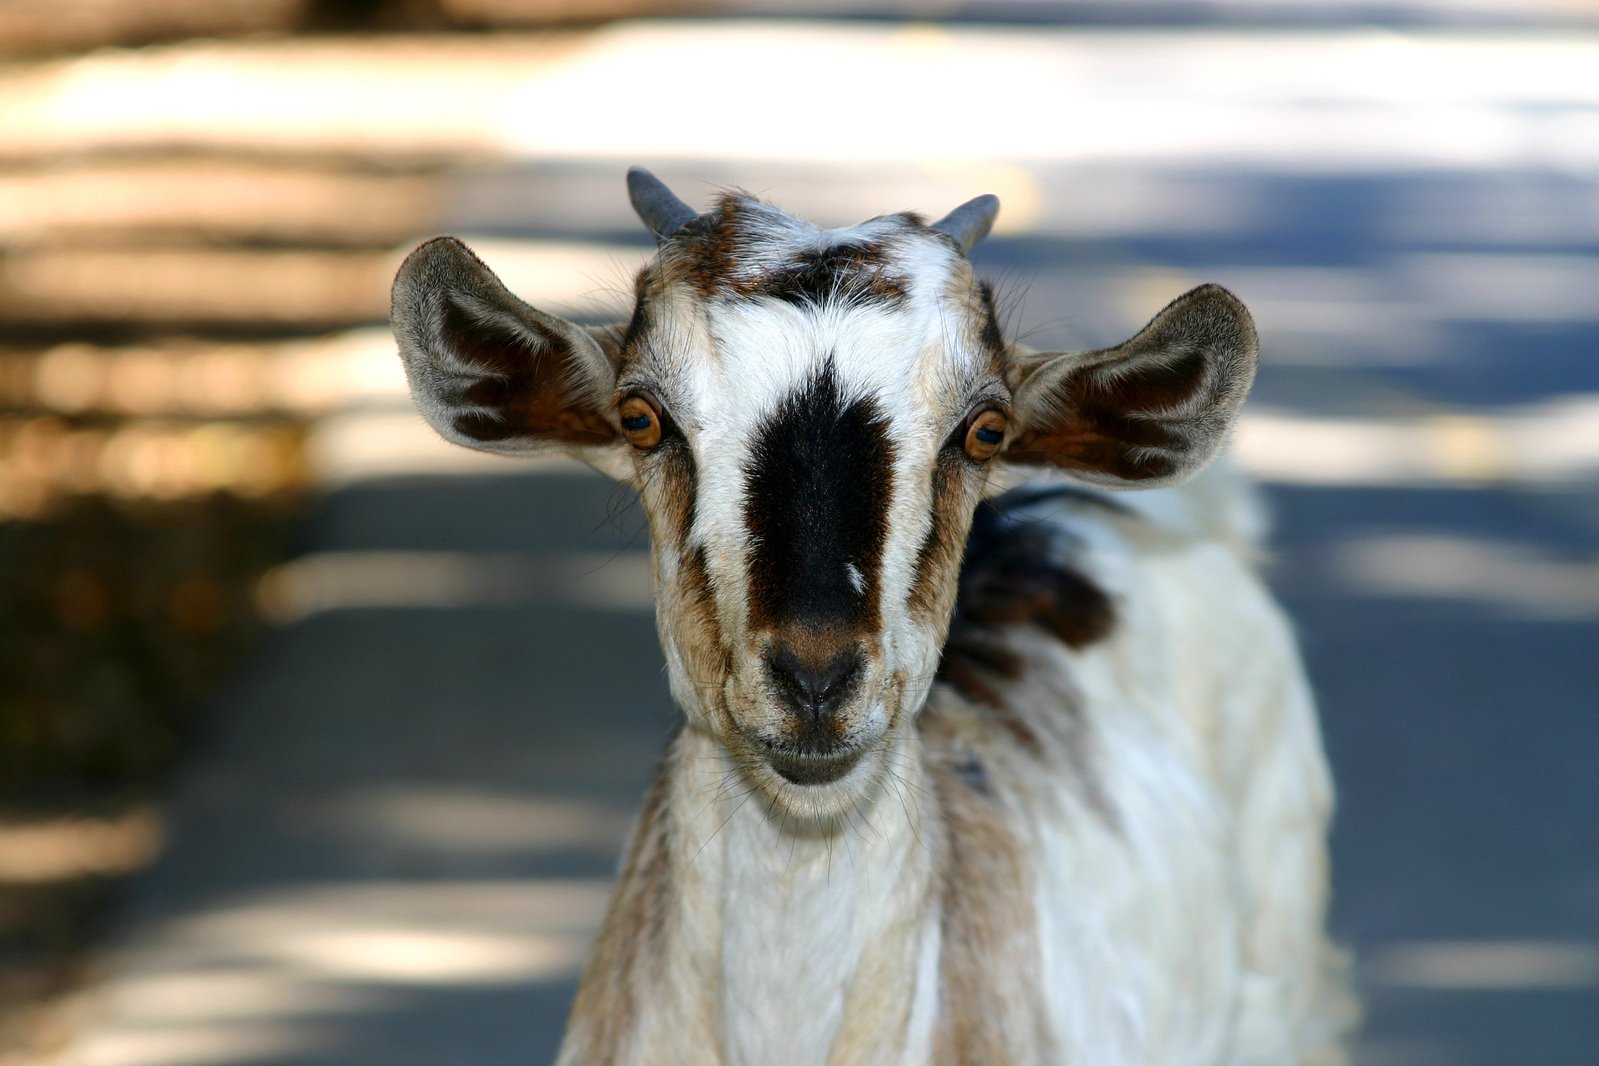 a goat with horns standing in the street